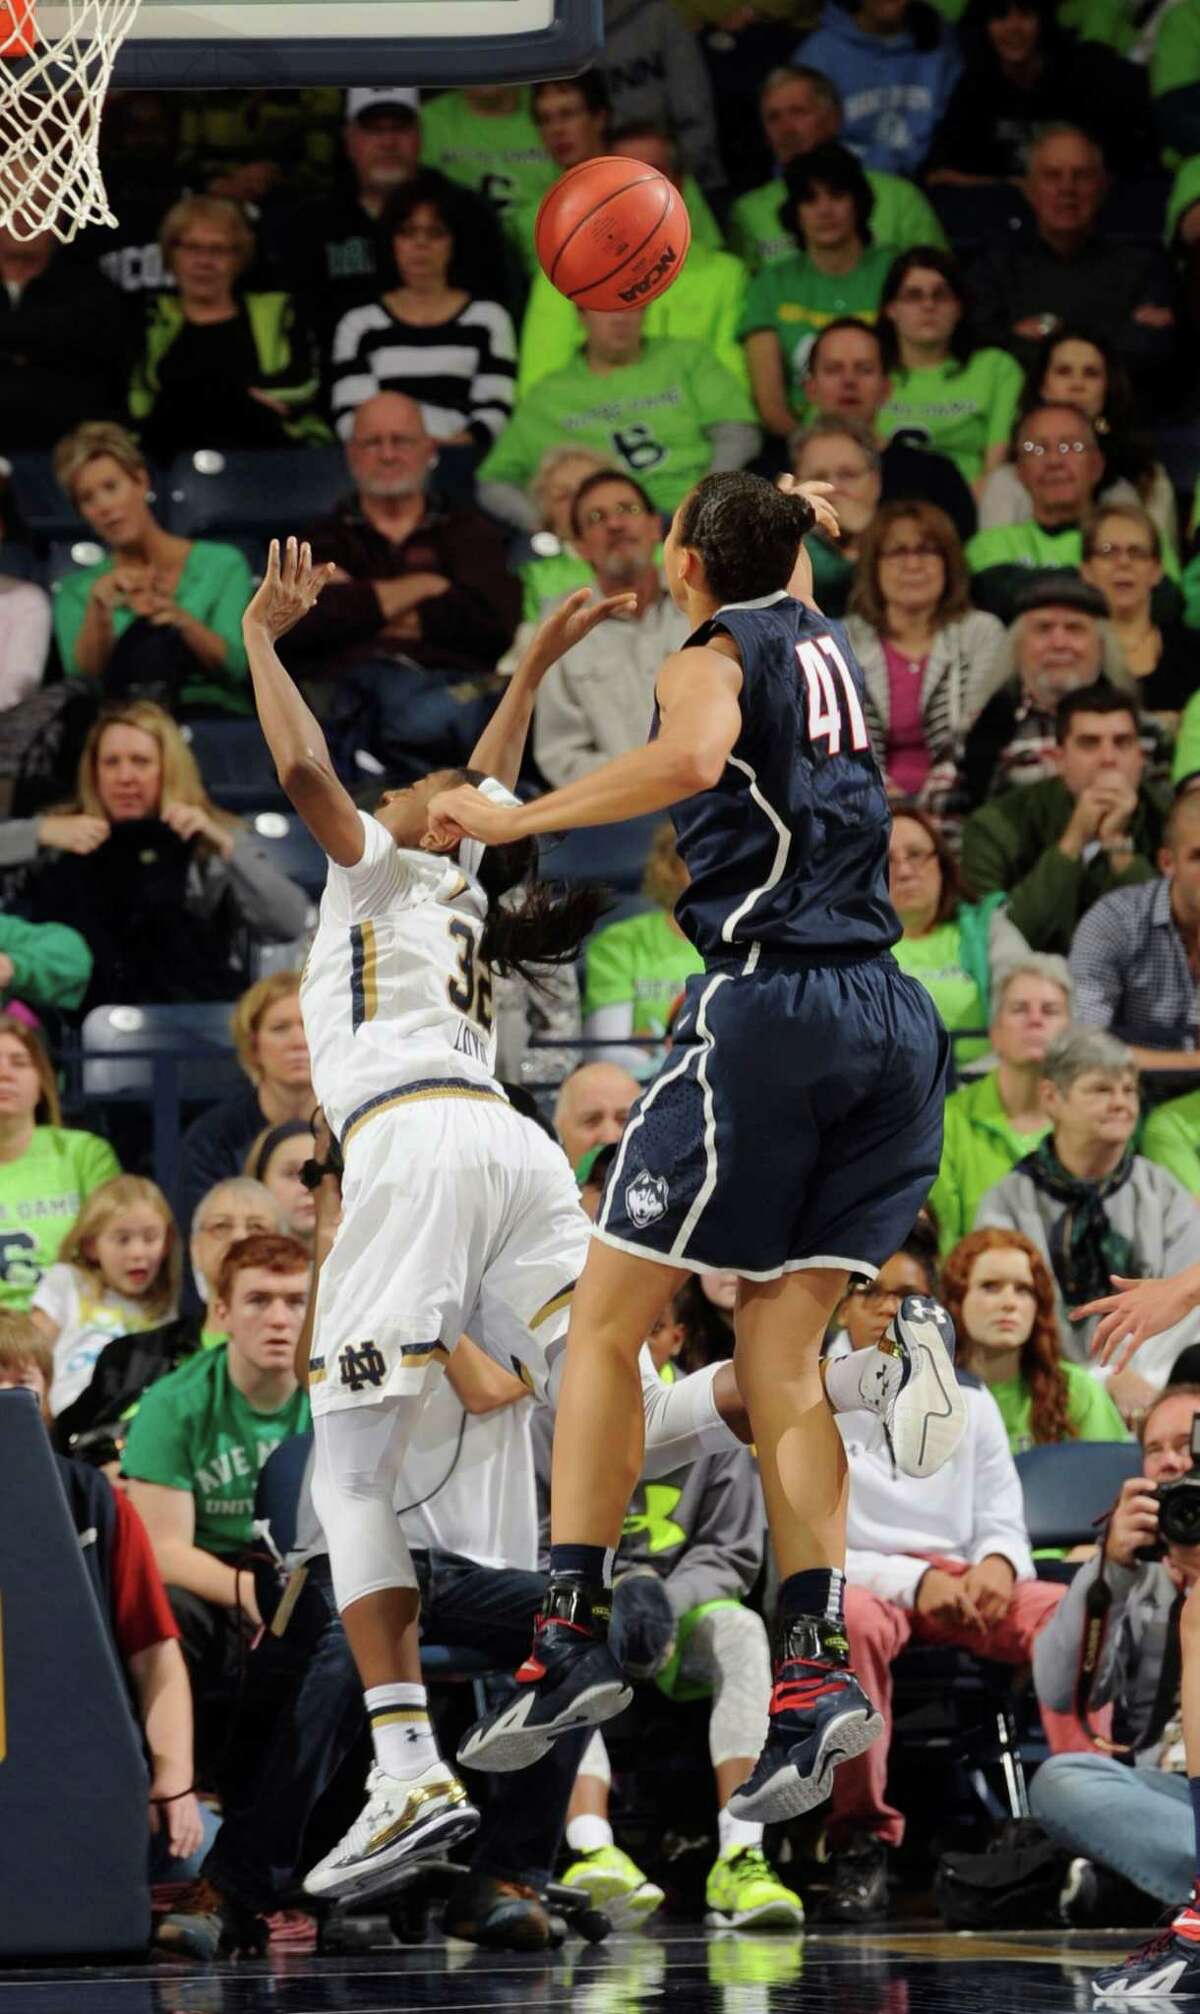 Connecticut forward Kiah Stokes blocks a shot by Notre Dame guard Jewell Loyd, left, in the second half of an NCAA college basketball game with Notre Dame, Saturday Dec. 6, 2014, in South Bend, Ind. Connecticut won 76-58. (AP Photo/Joe Raymond)